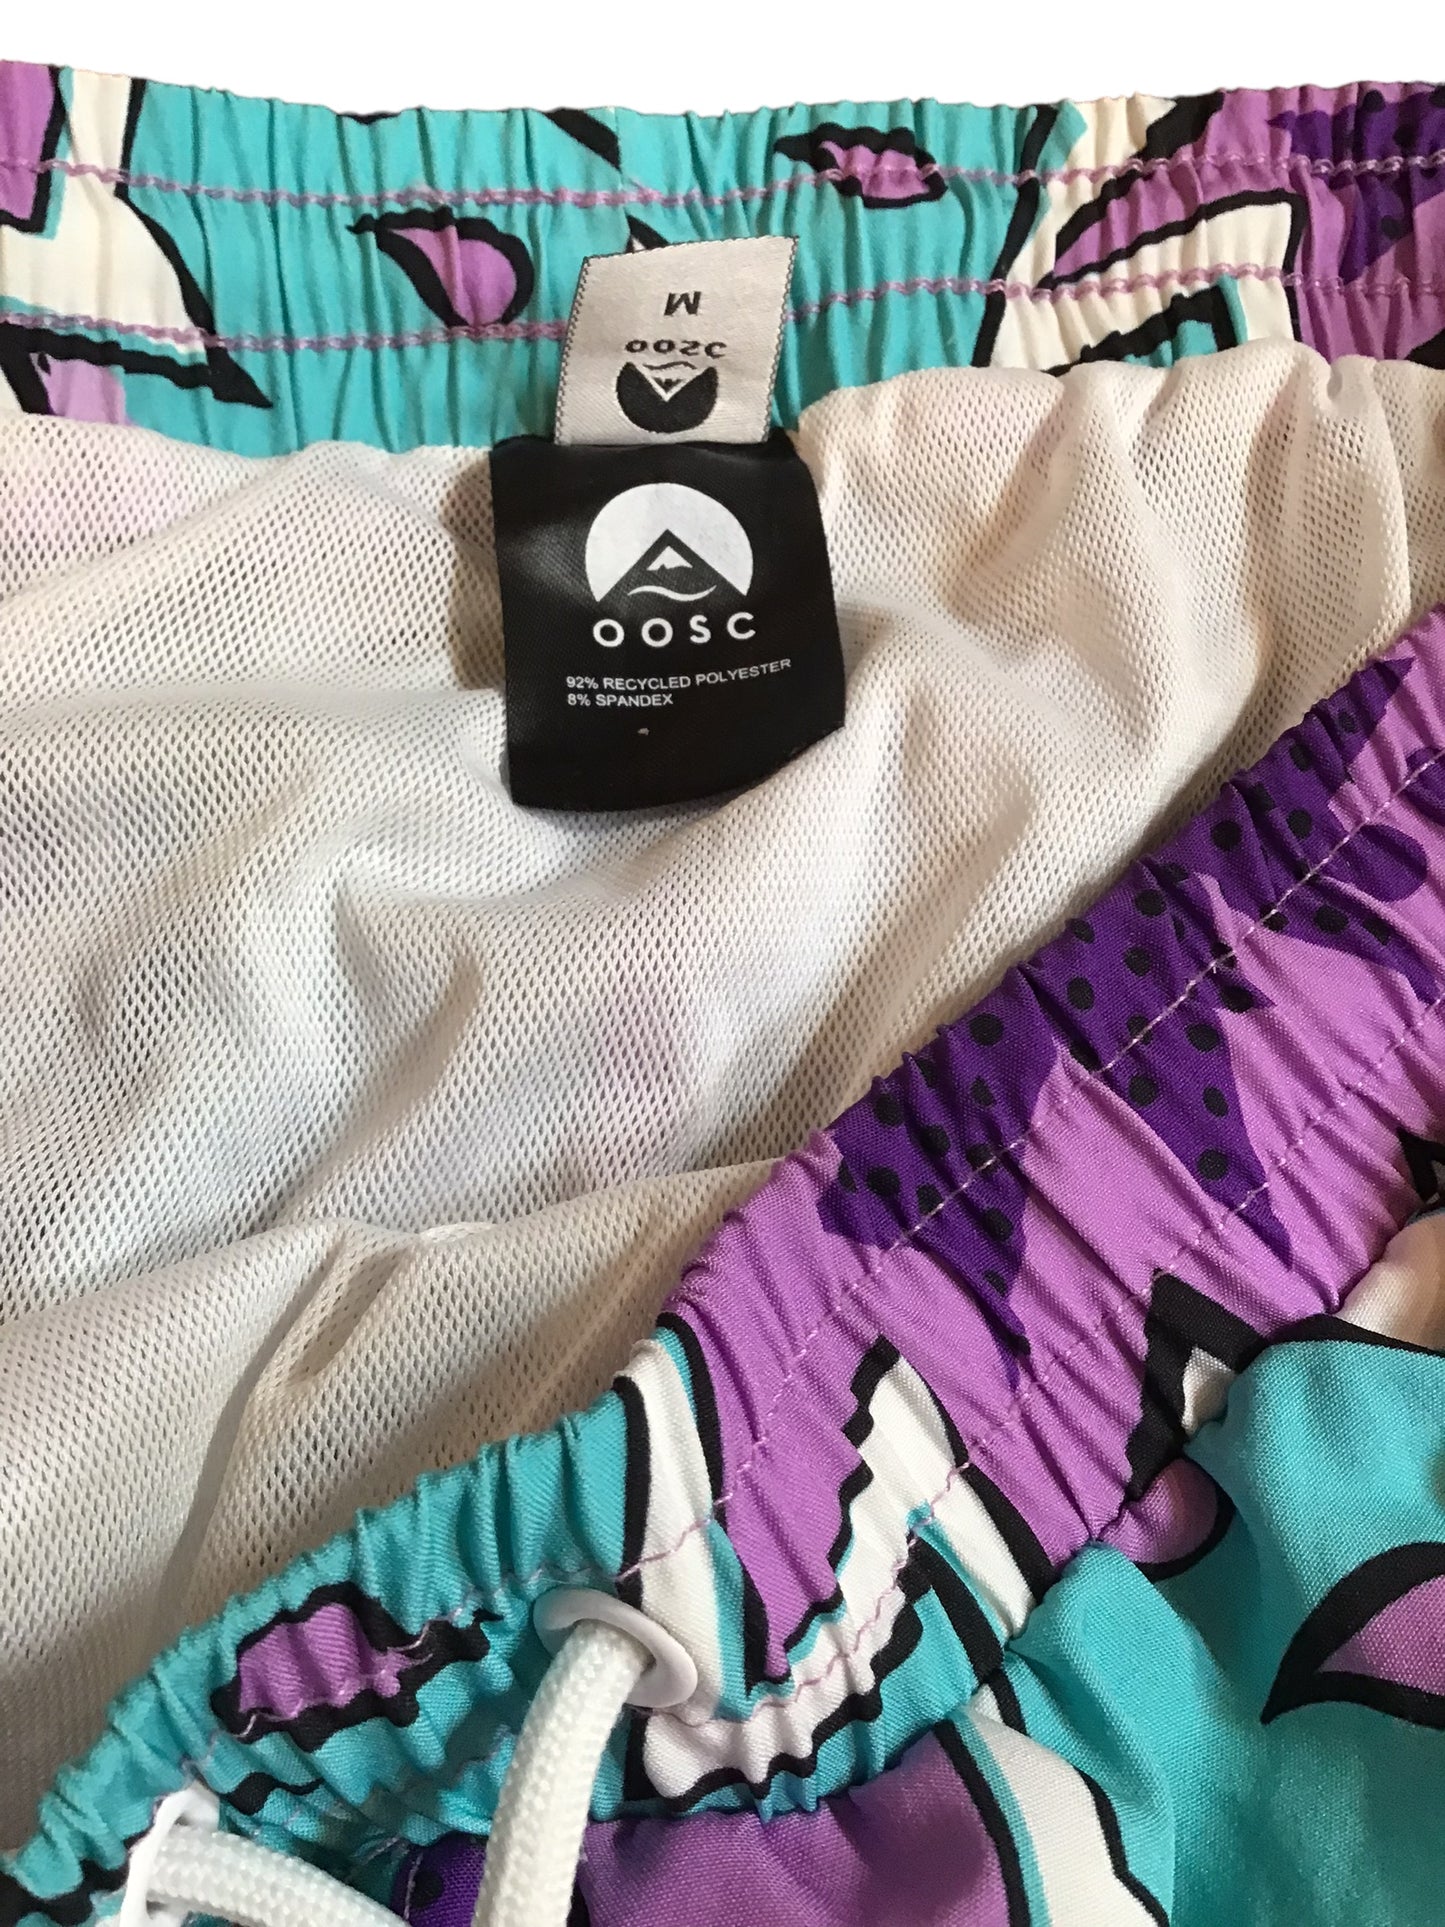 Men’s swim shorts from OOSC (Size M)